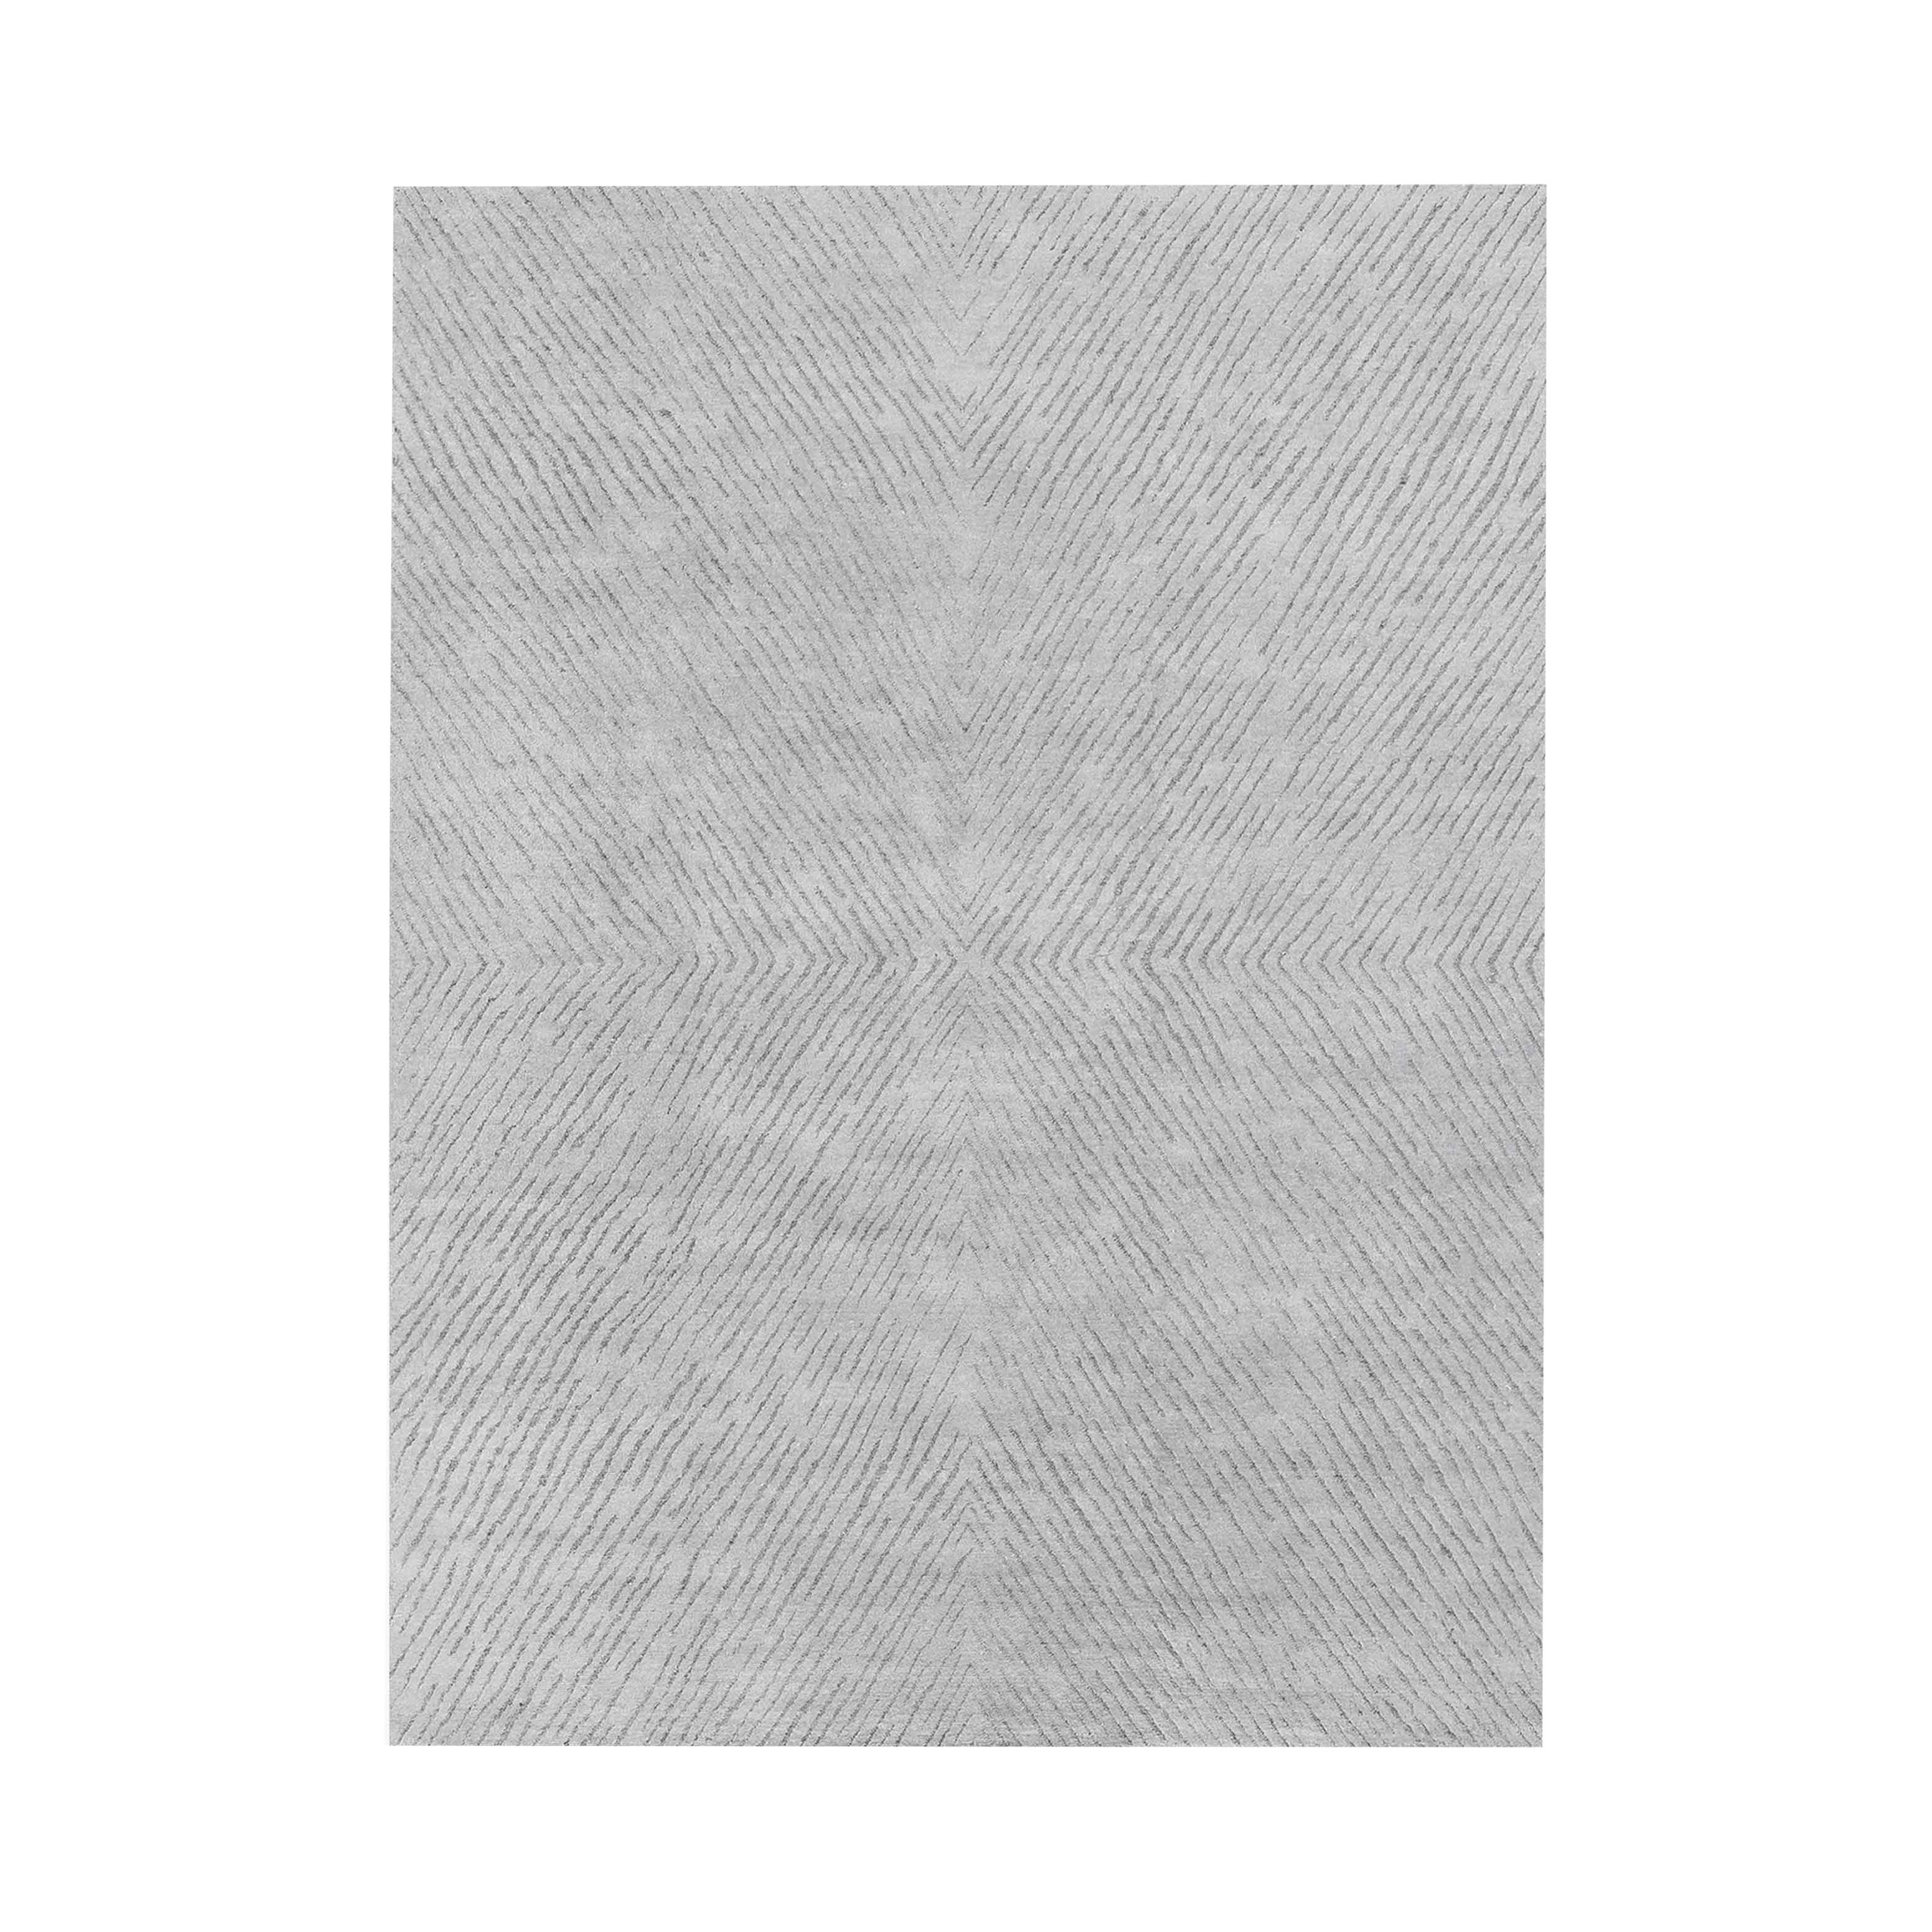 For Sale: Gray (Nickel/Carbon) Ben Soleimani Performance Setta Rug– Handknotted Soft Pile Nickel/Carbon 8'x10'